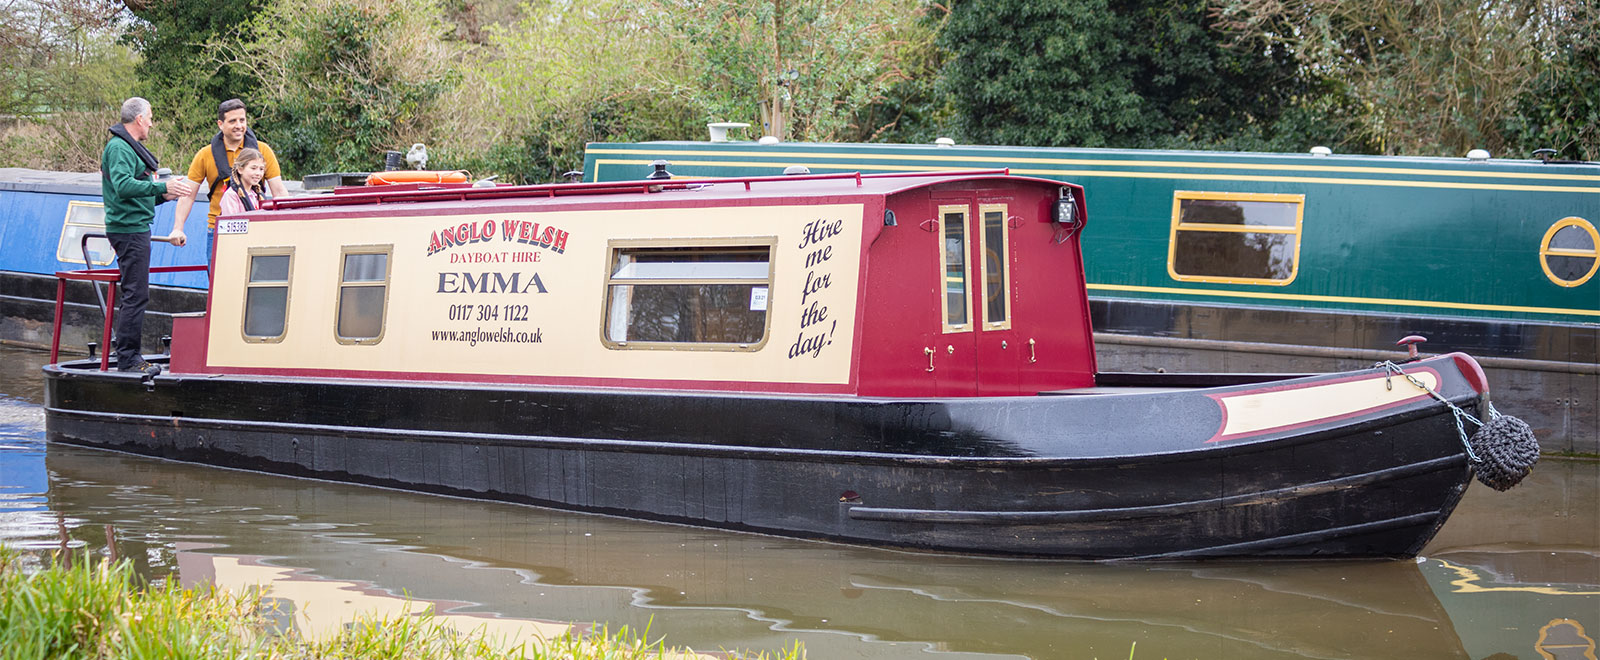 Anglo Welsh, the narrowboat holiday company, has acquired Sally Narrowboats, expanding its canal boat hire offering to the Kennet and Avon Canal at Bradford-on-Avon Marina in Wiltshire.